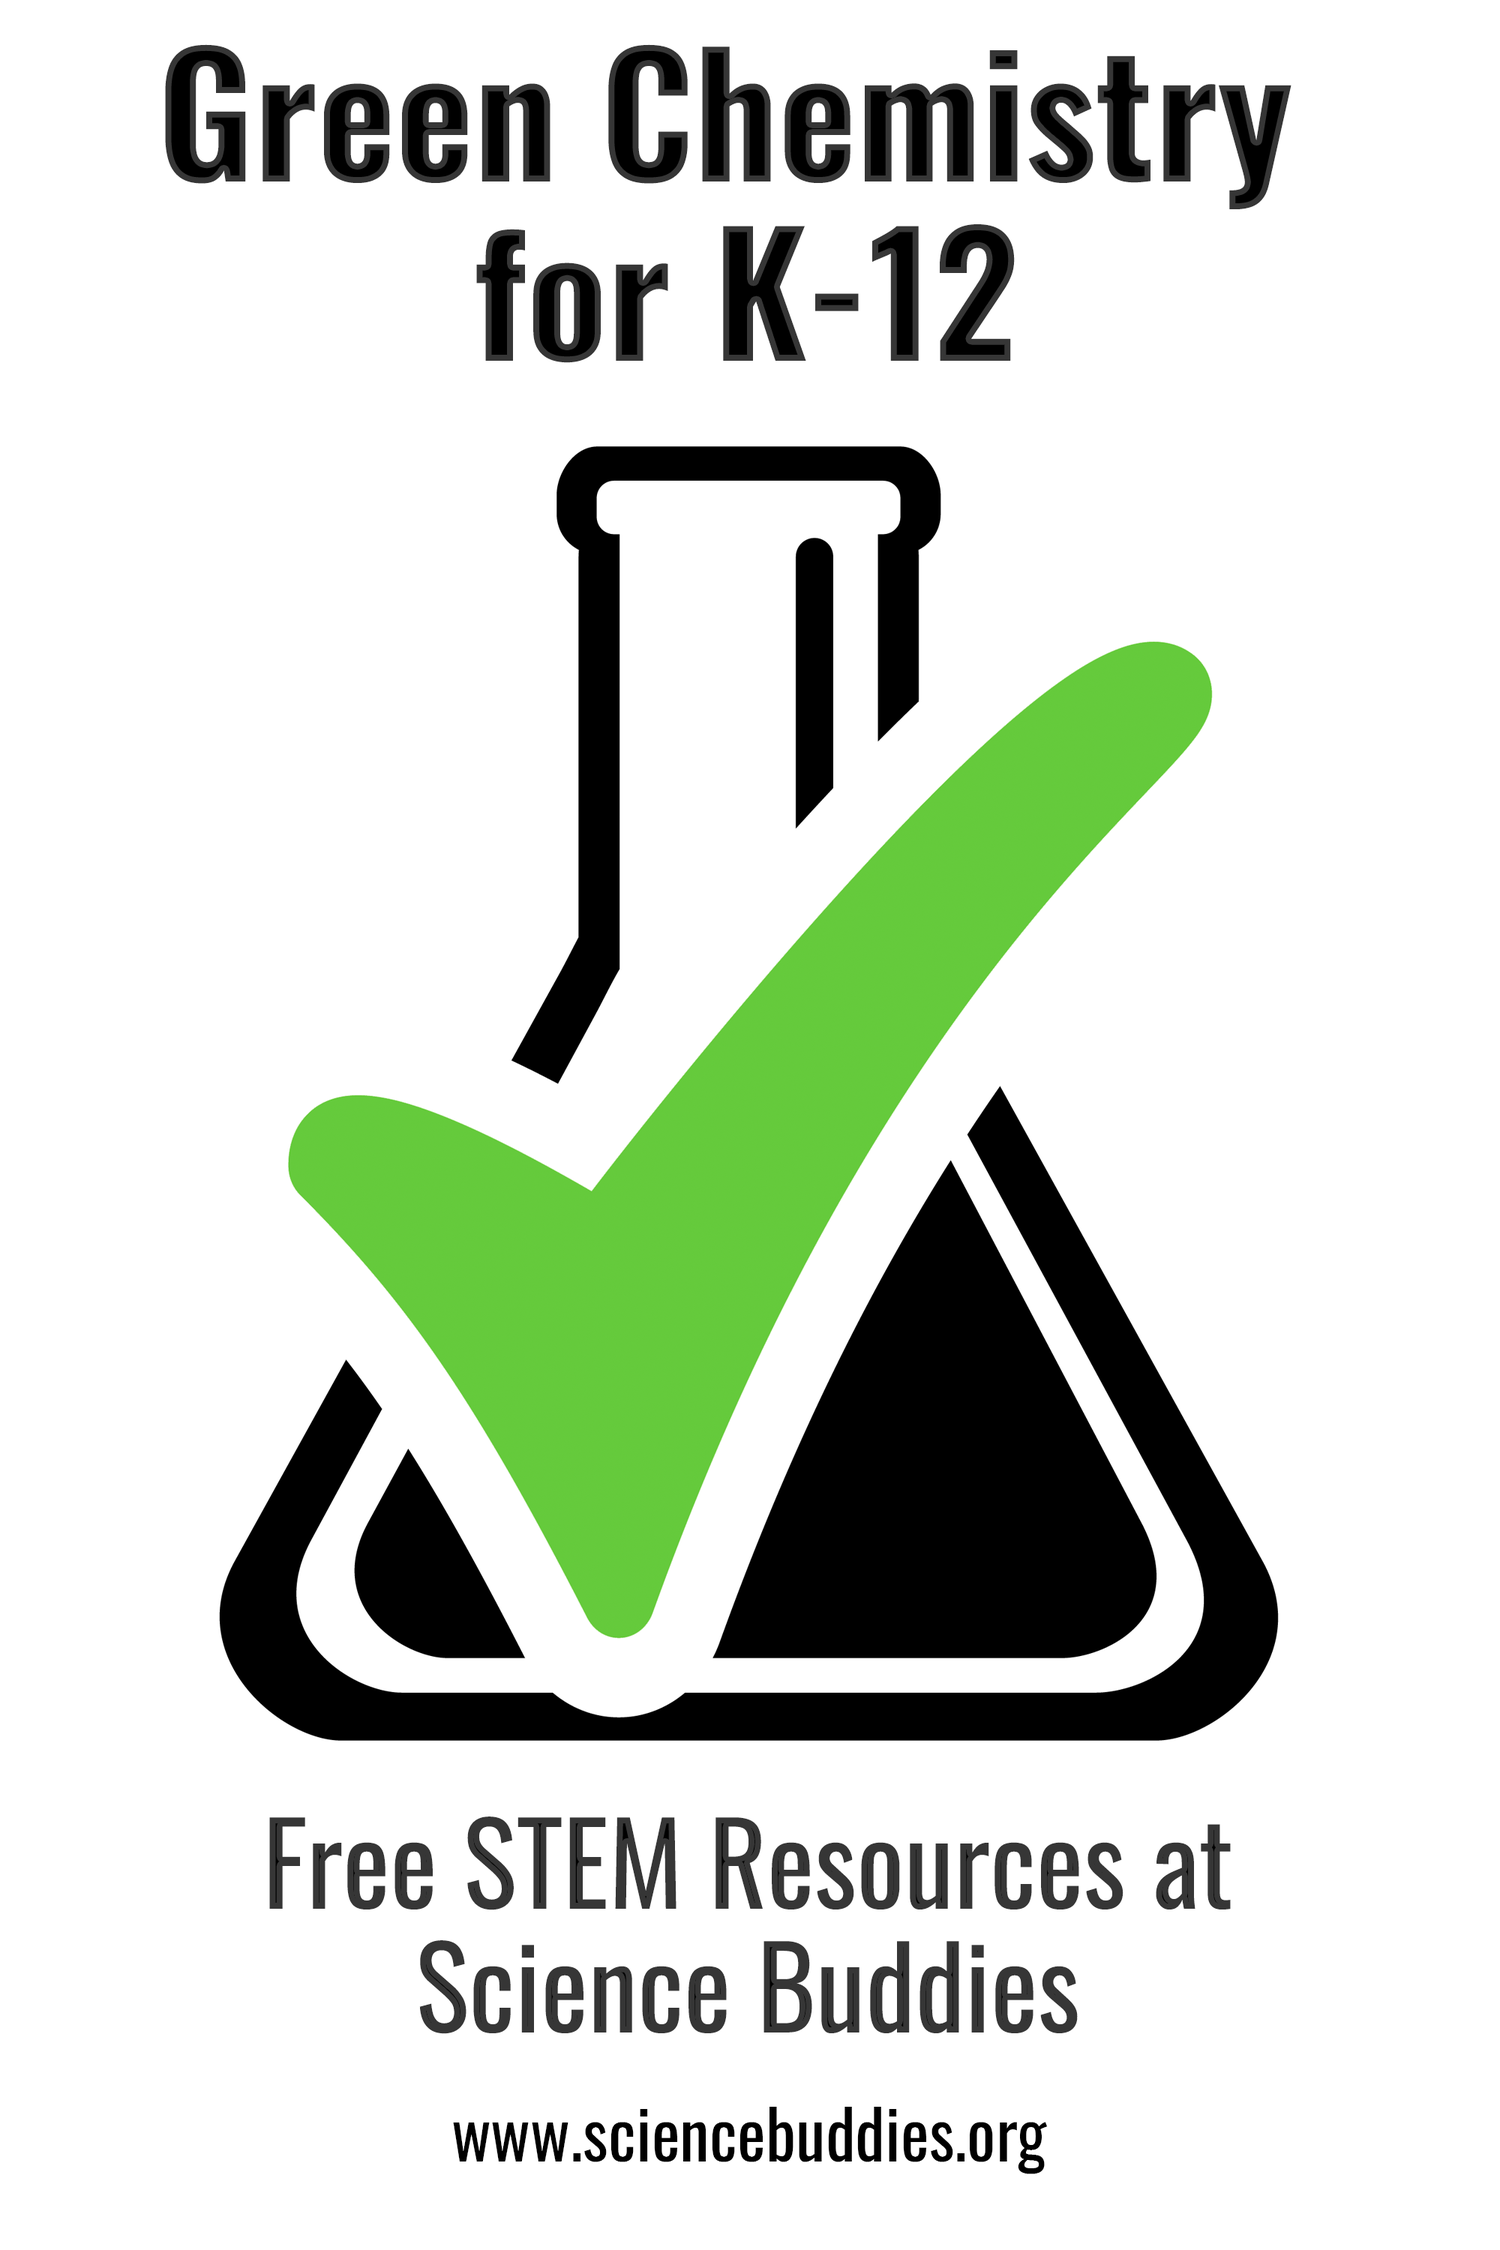 Beaker with green checkmark for Green Chemistry Resource